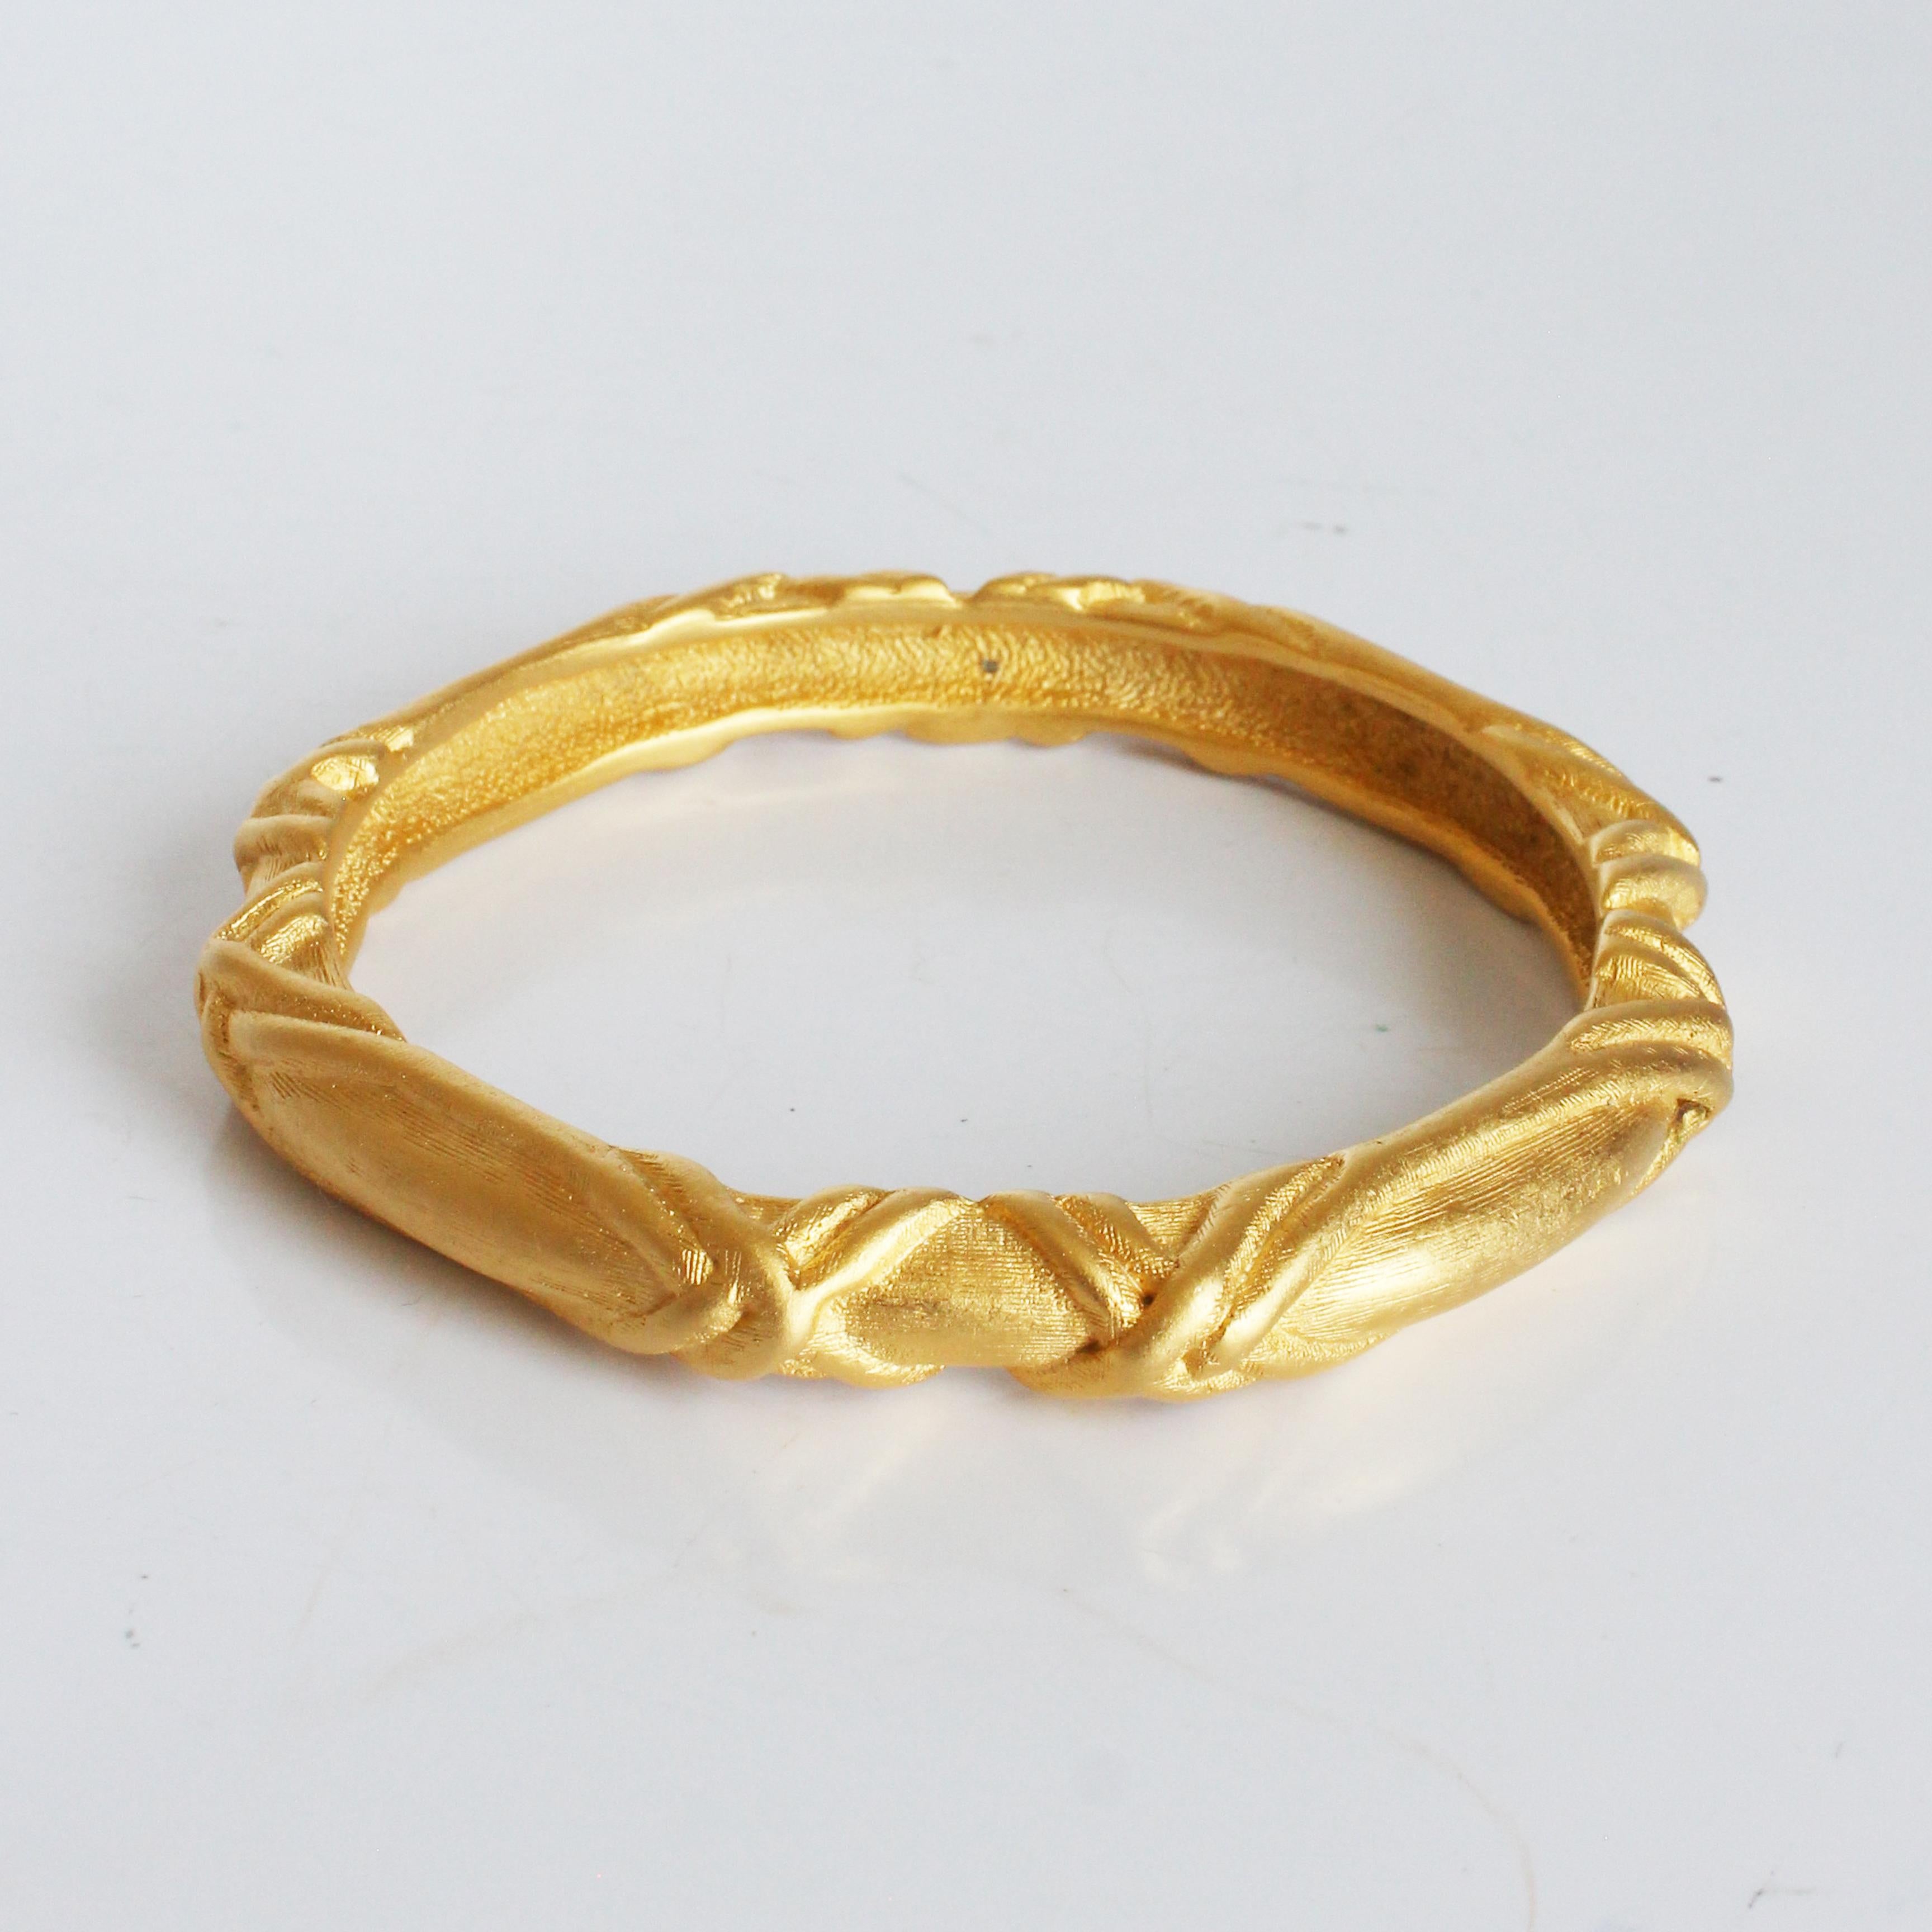 Givenchy Bracelet Bangle Gold Metal Textured Abstract Vintage 80s Jewelry  For Sale 5